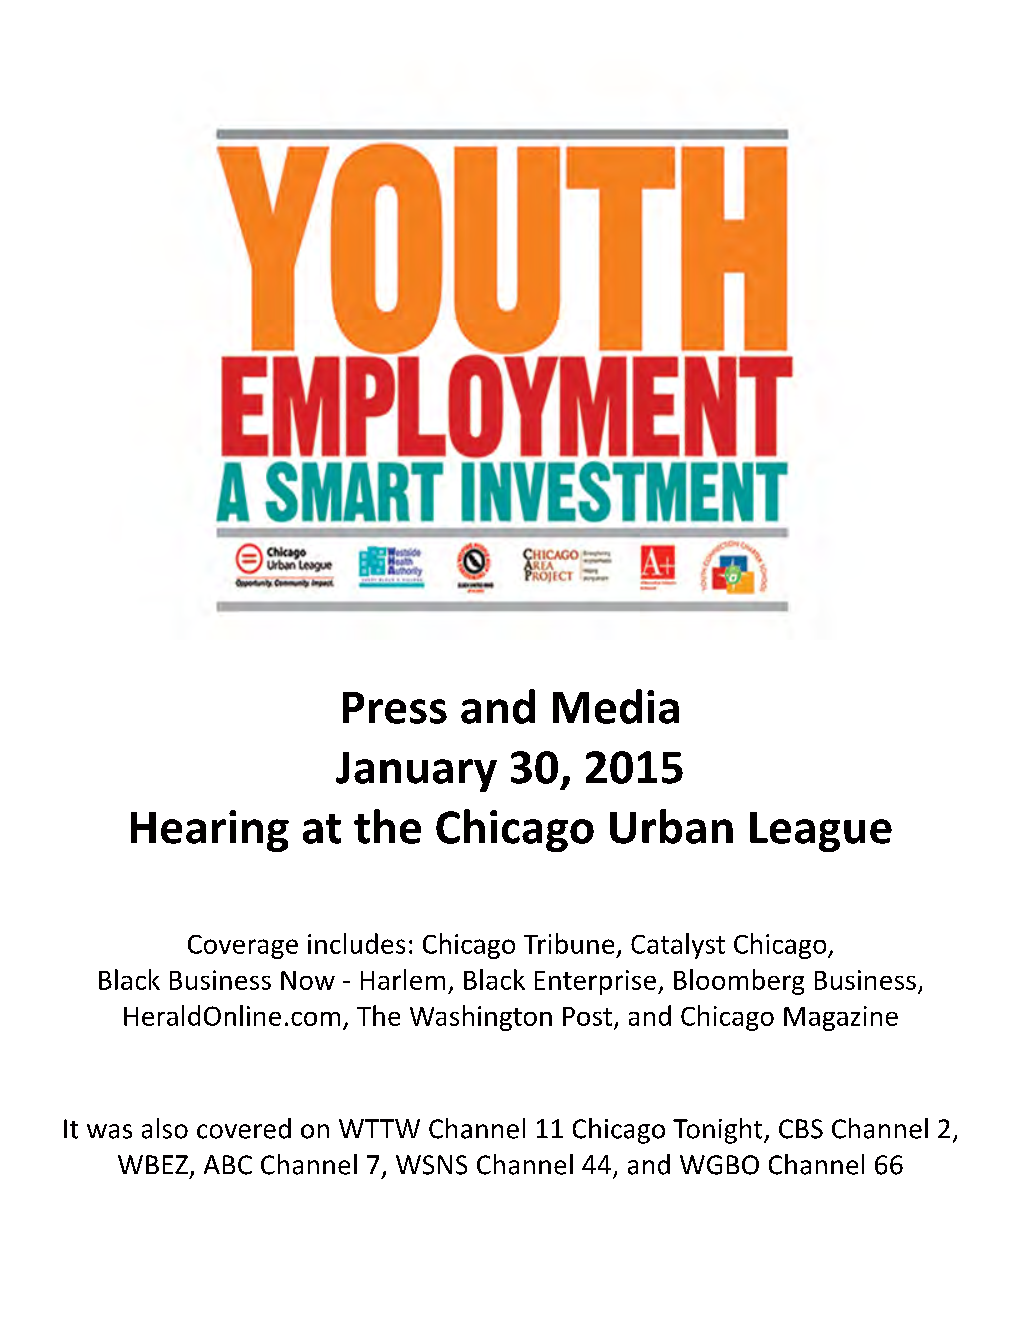 Coverage for New Teen Employment Report Released on January 30, 2015